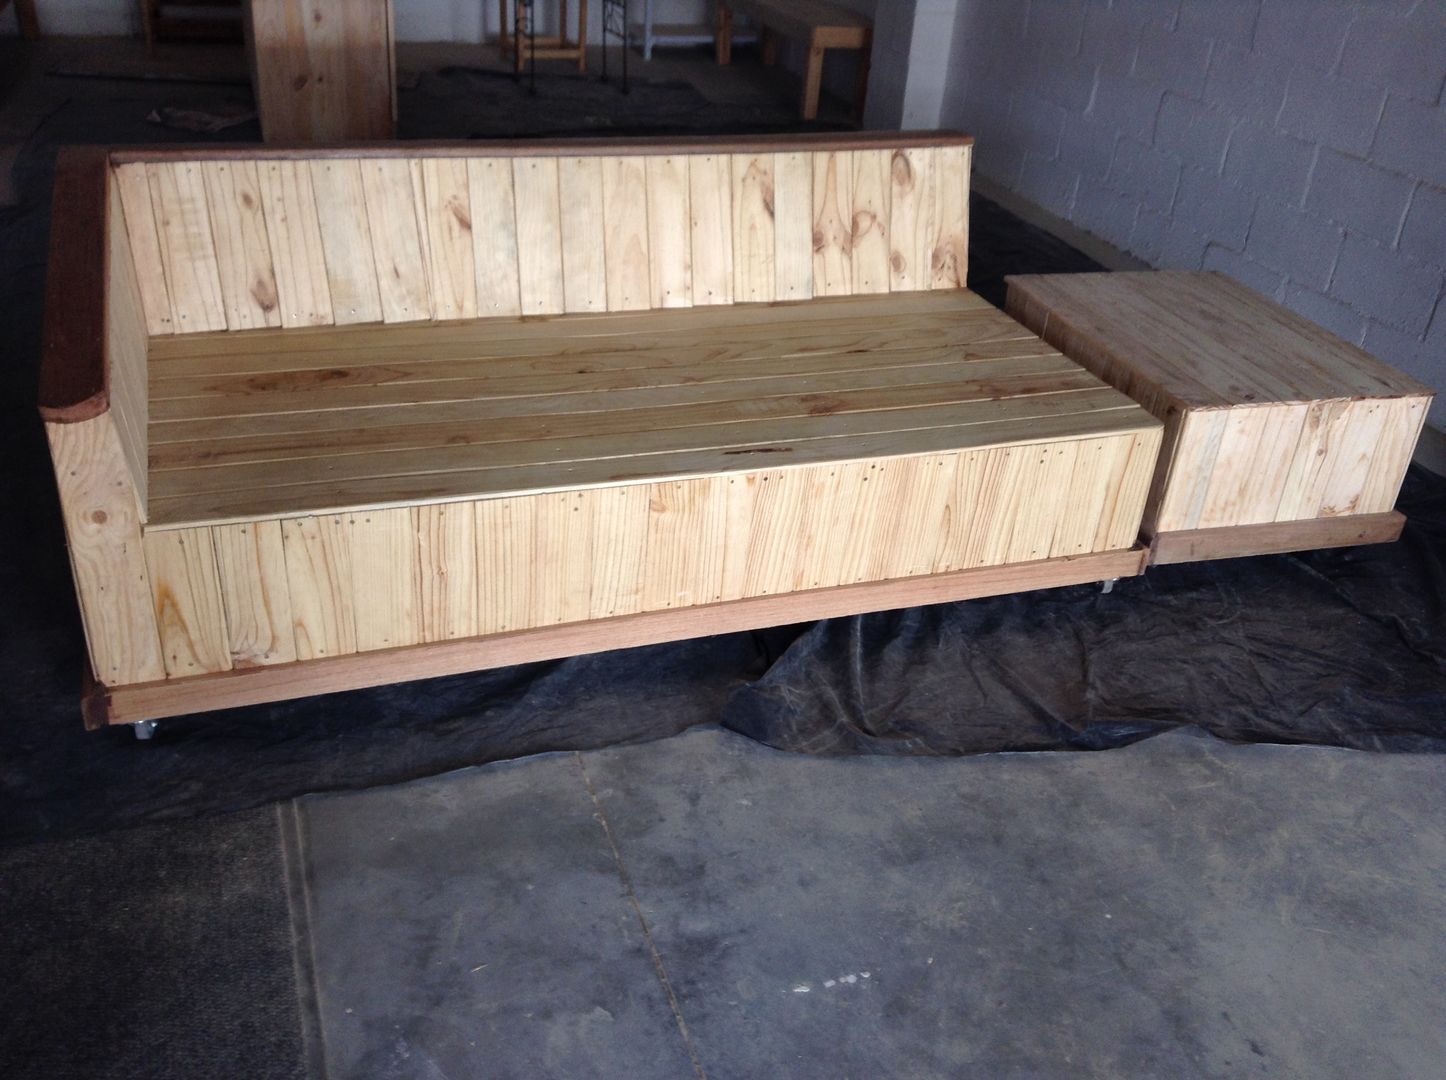 Four Seater Daybed Pallet Furniture Cape Town Patios & Decks Furniture